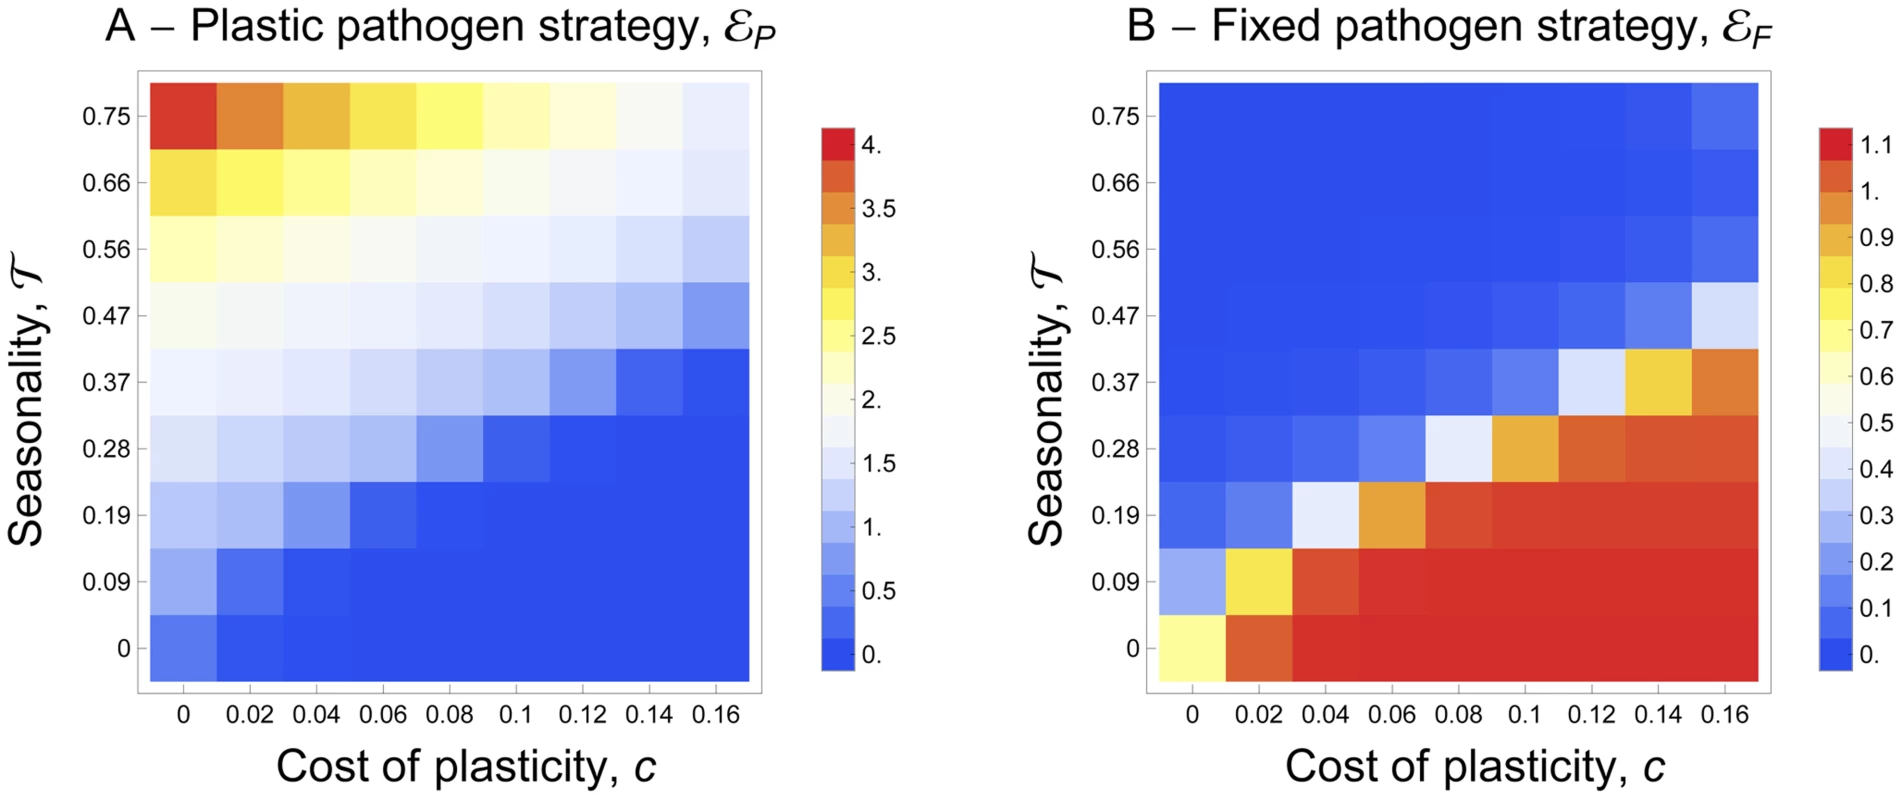 Joint evolution of (A) the plastic pathogen strategy, <i>ε<sub>P</sub></i> and of (B) the fixed pathogen strategy, <i>ε<sub>F</sub></i> for different values of seasonality, <i>τ</i>, and for different costs of plasticity, <i>c</i>.